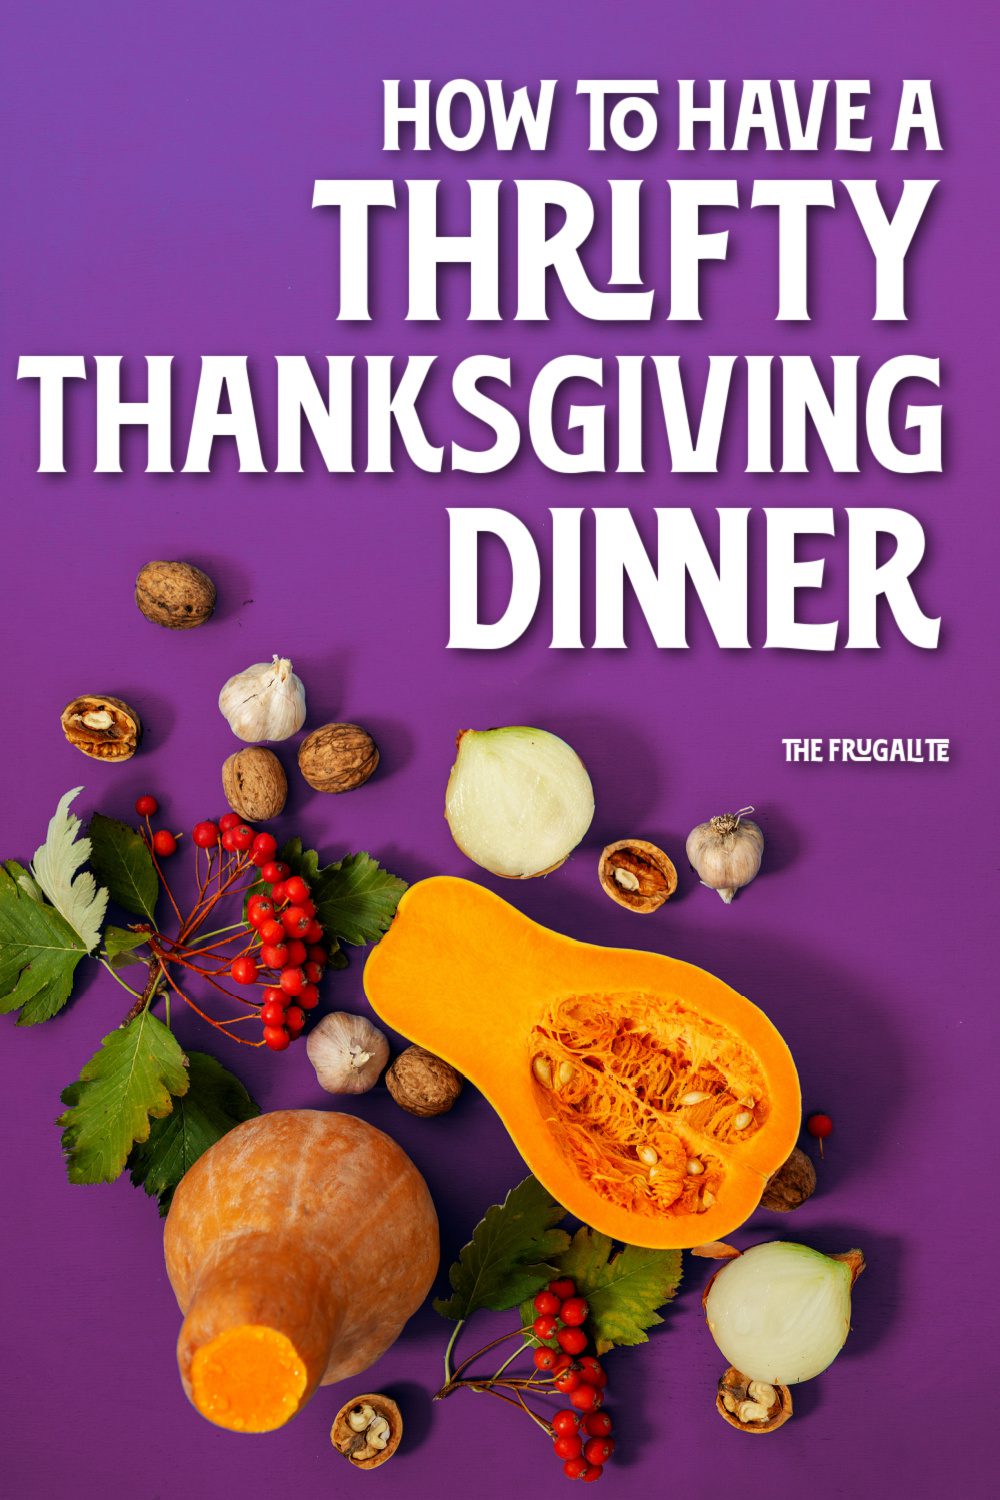 How to Have a Thrifty Thanksgiving Dinner